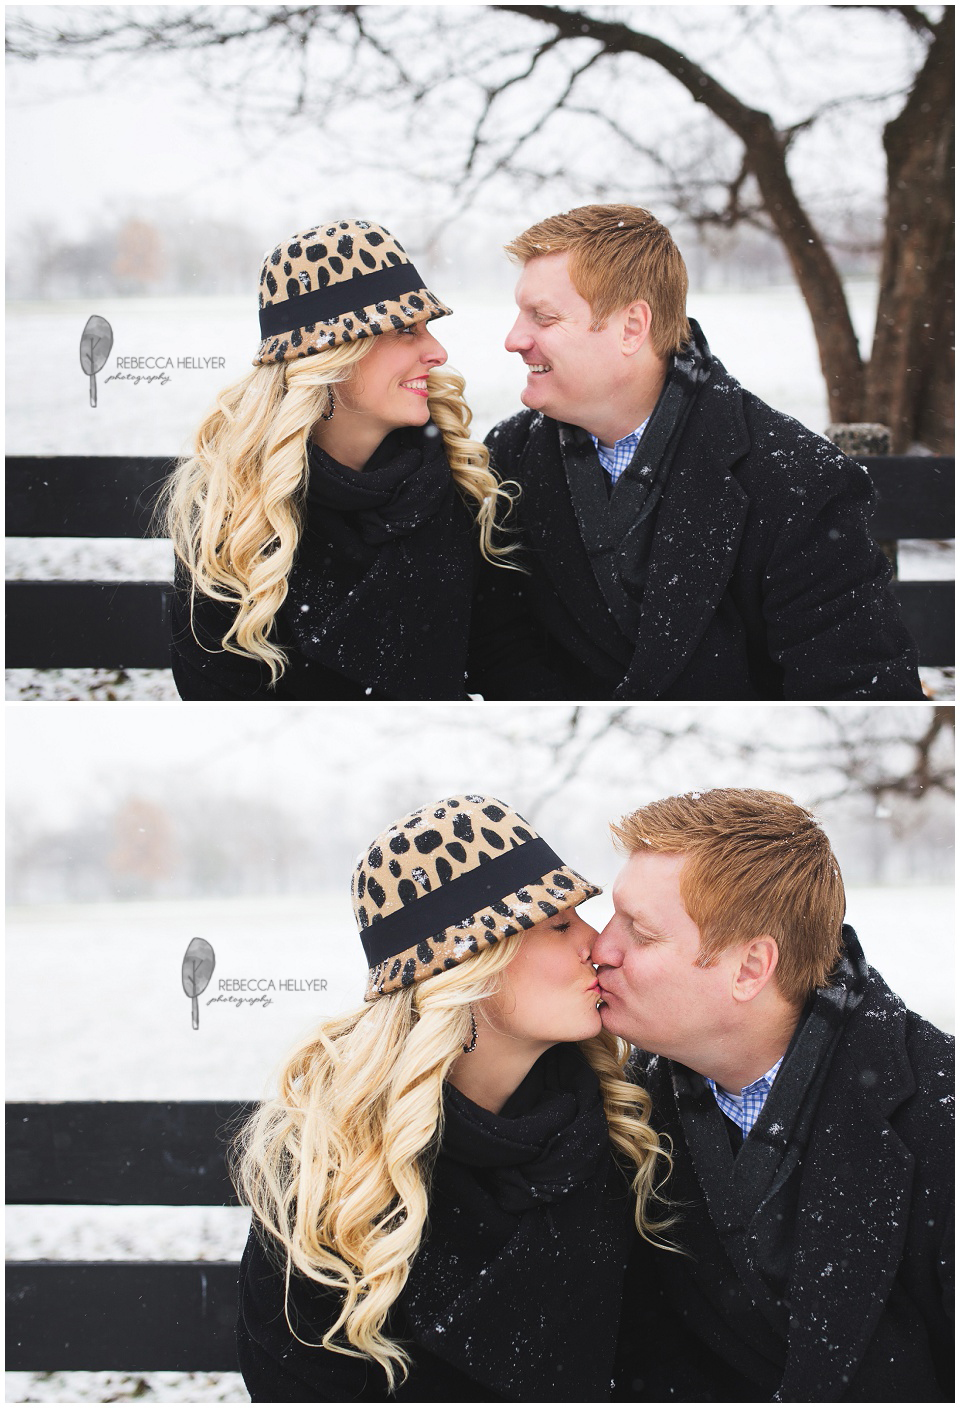 Chicago Couples Photographer | Rebecca Hellyer Photography